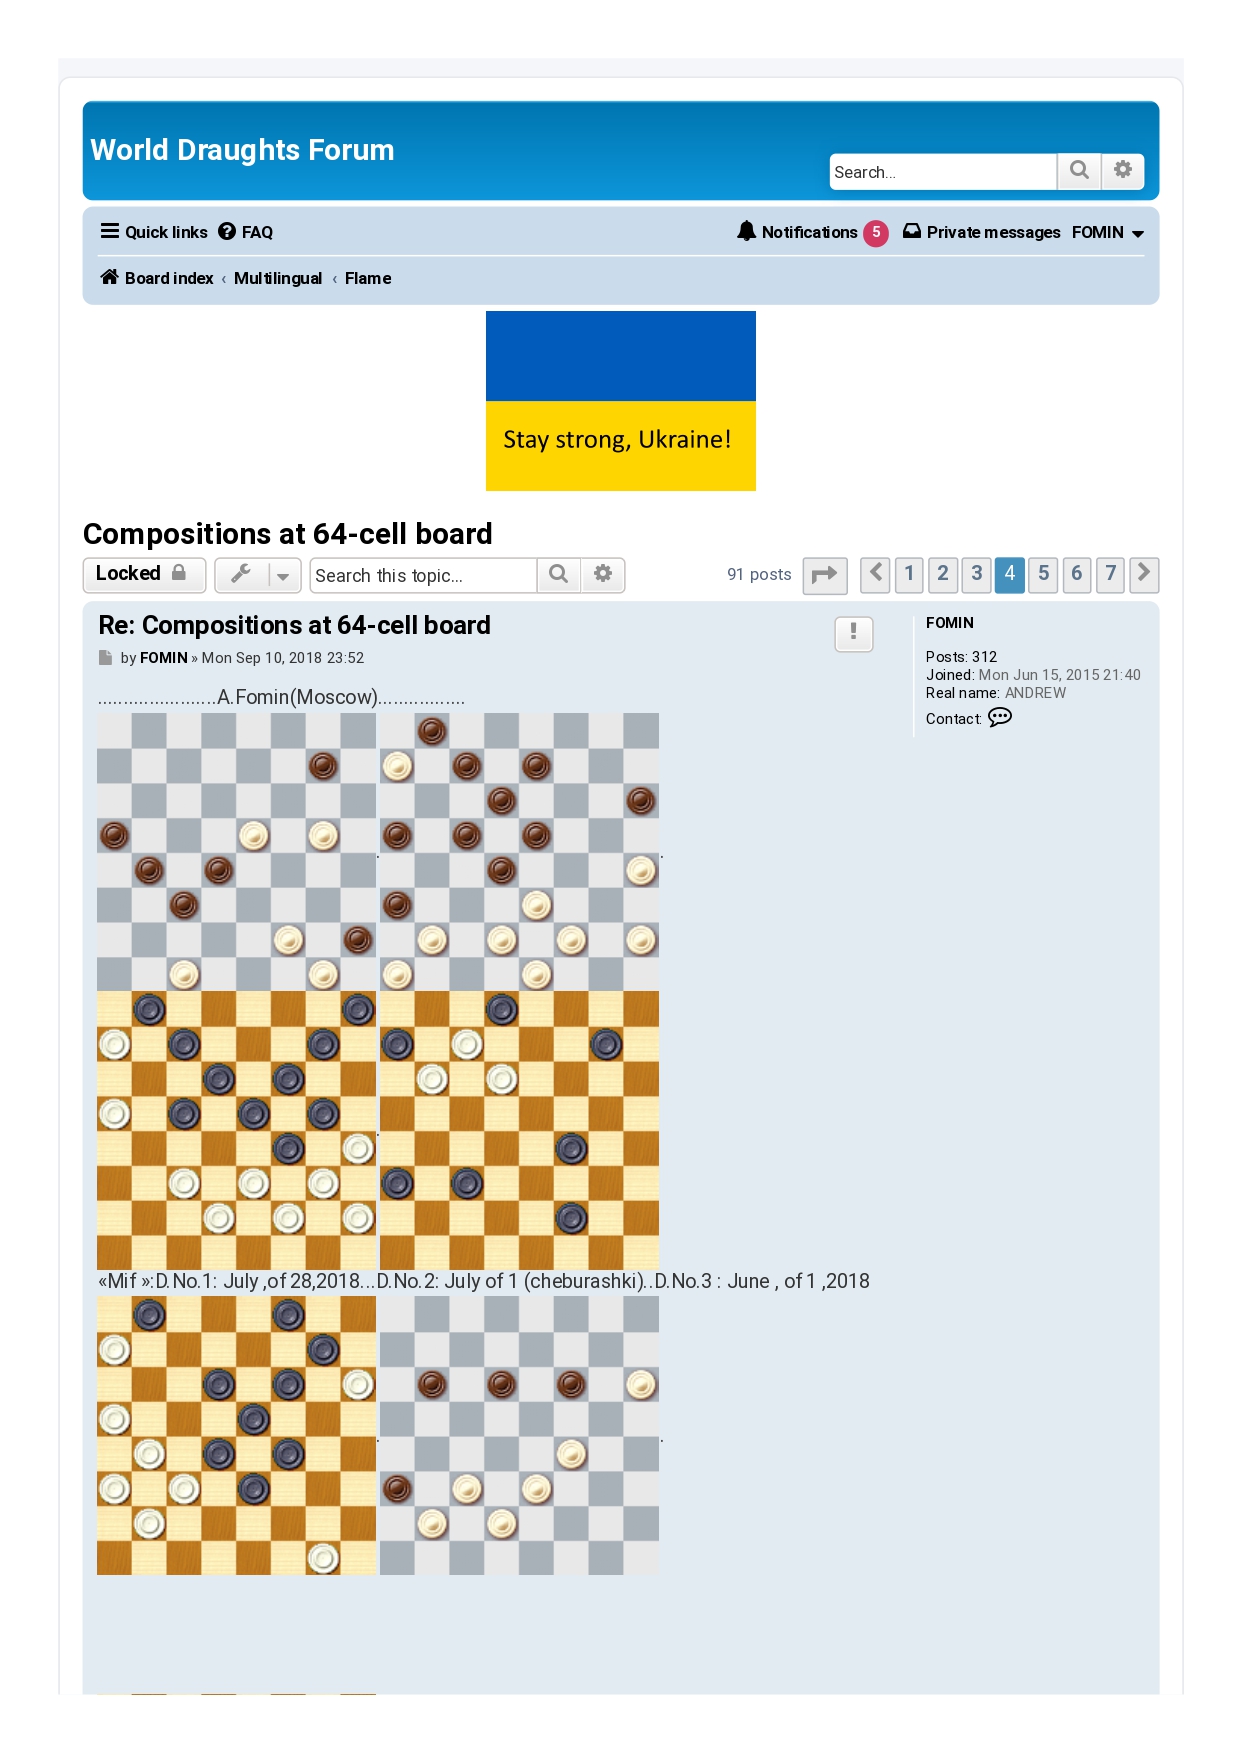 (5) Compositions at 64-cell board - Page 4 - World Draughts Foru_page-0001.jpg